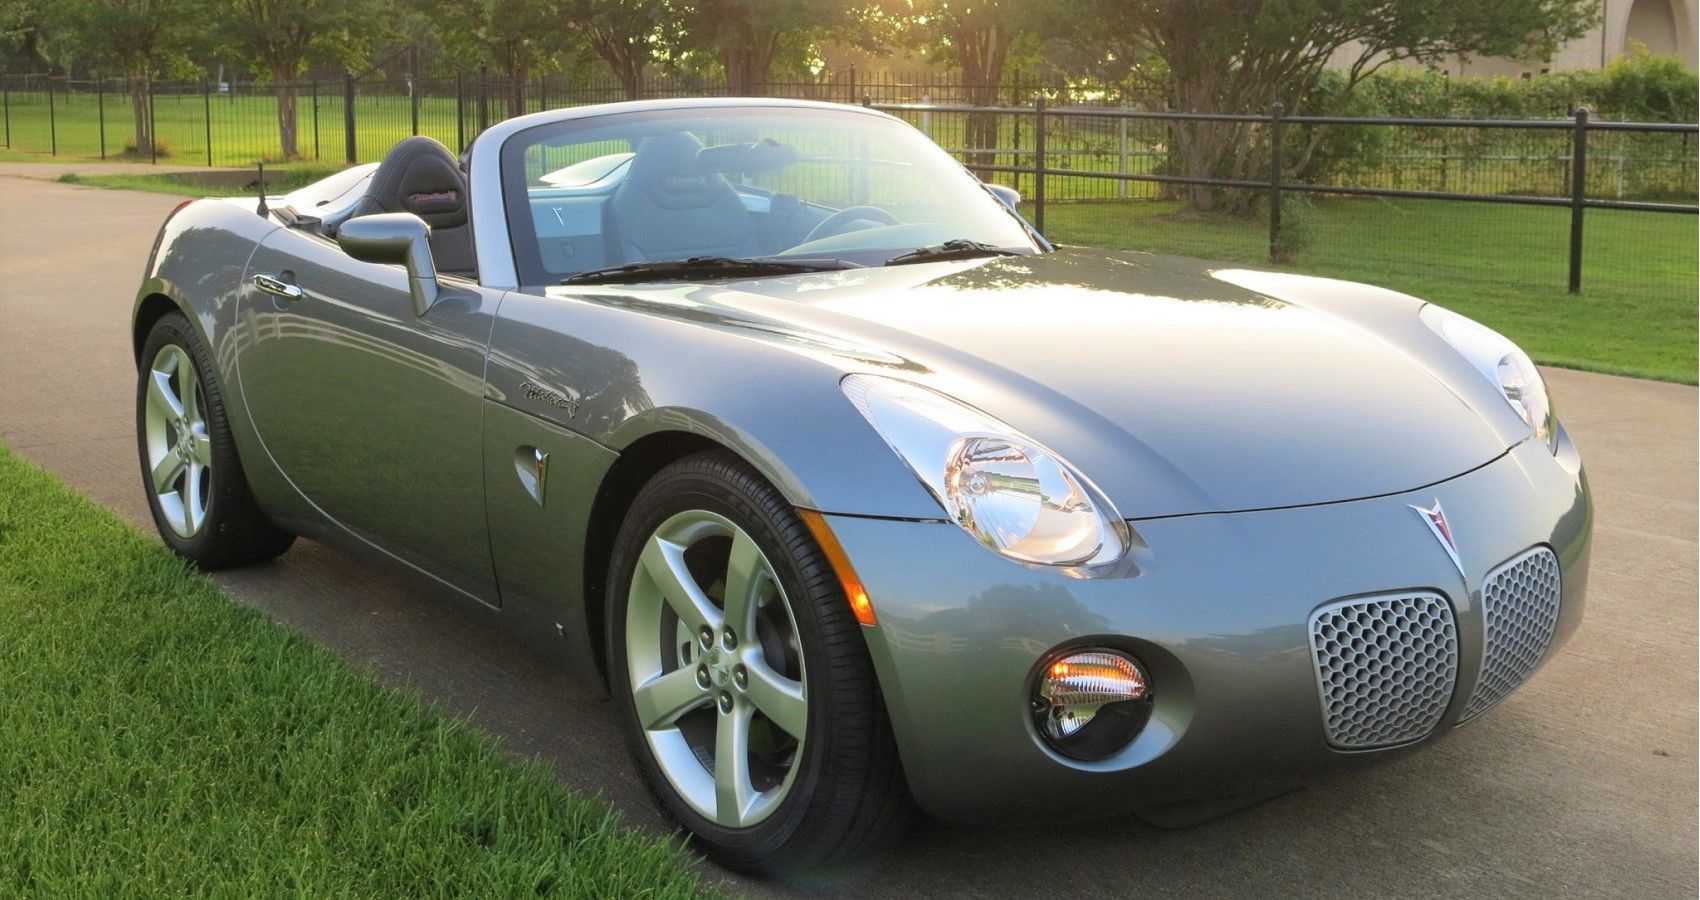 Why The Pontiac Solstice Is One Of The Biggest Sports Car Flops Of The ...